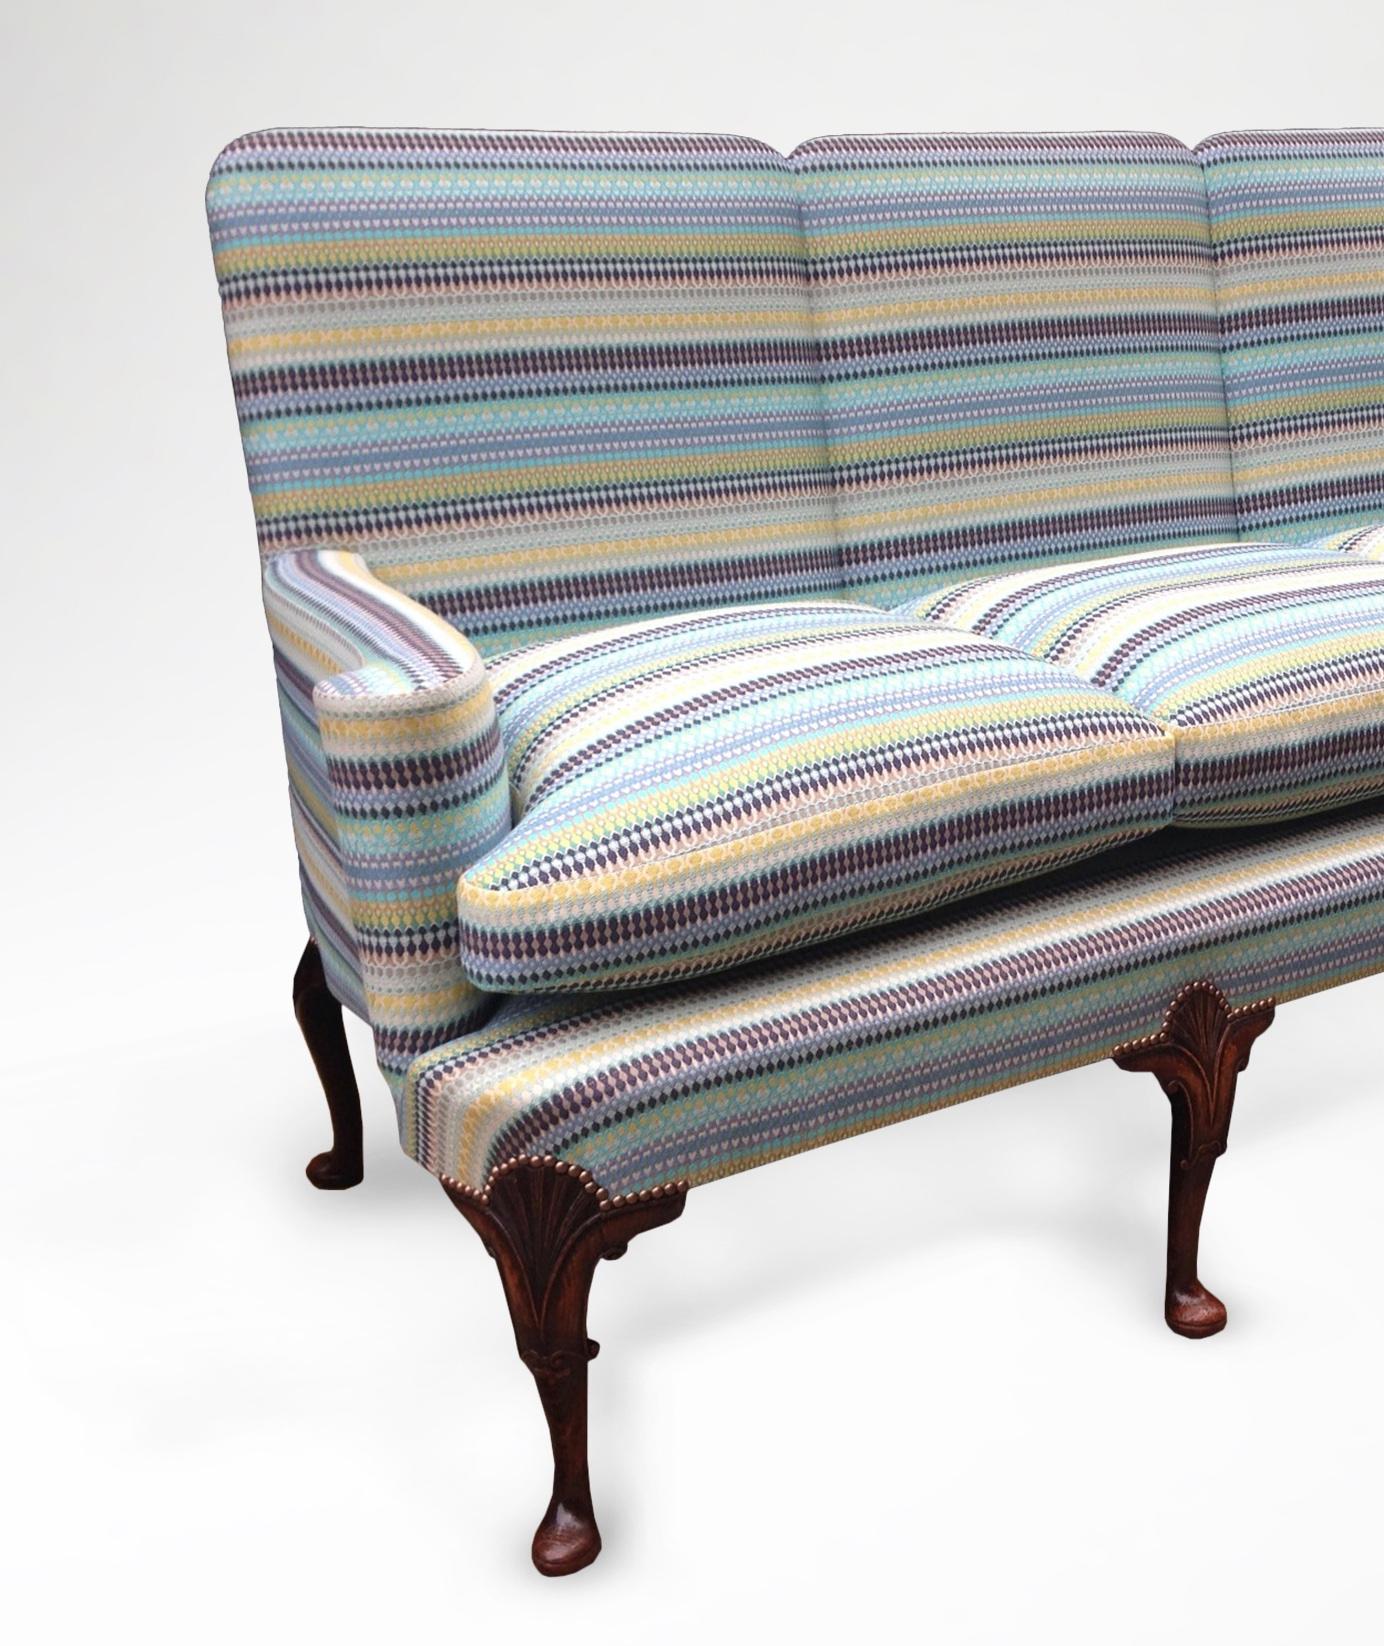 George III English Settee with Striped Upholstery in the Georgian Manner For Sale